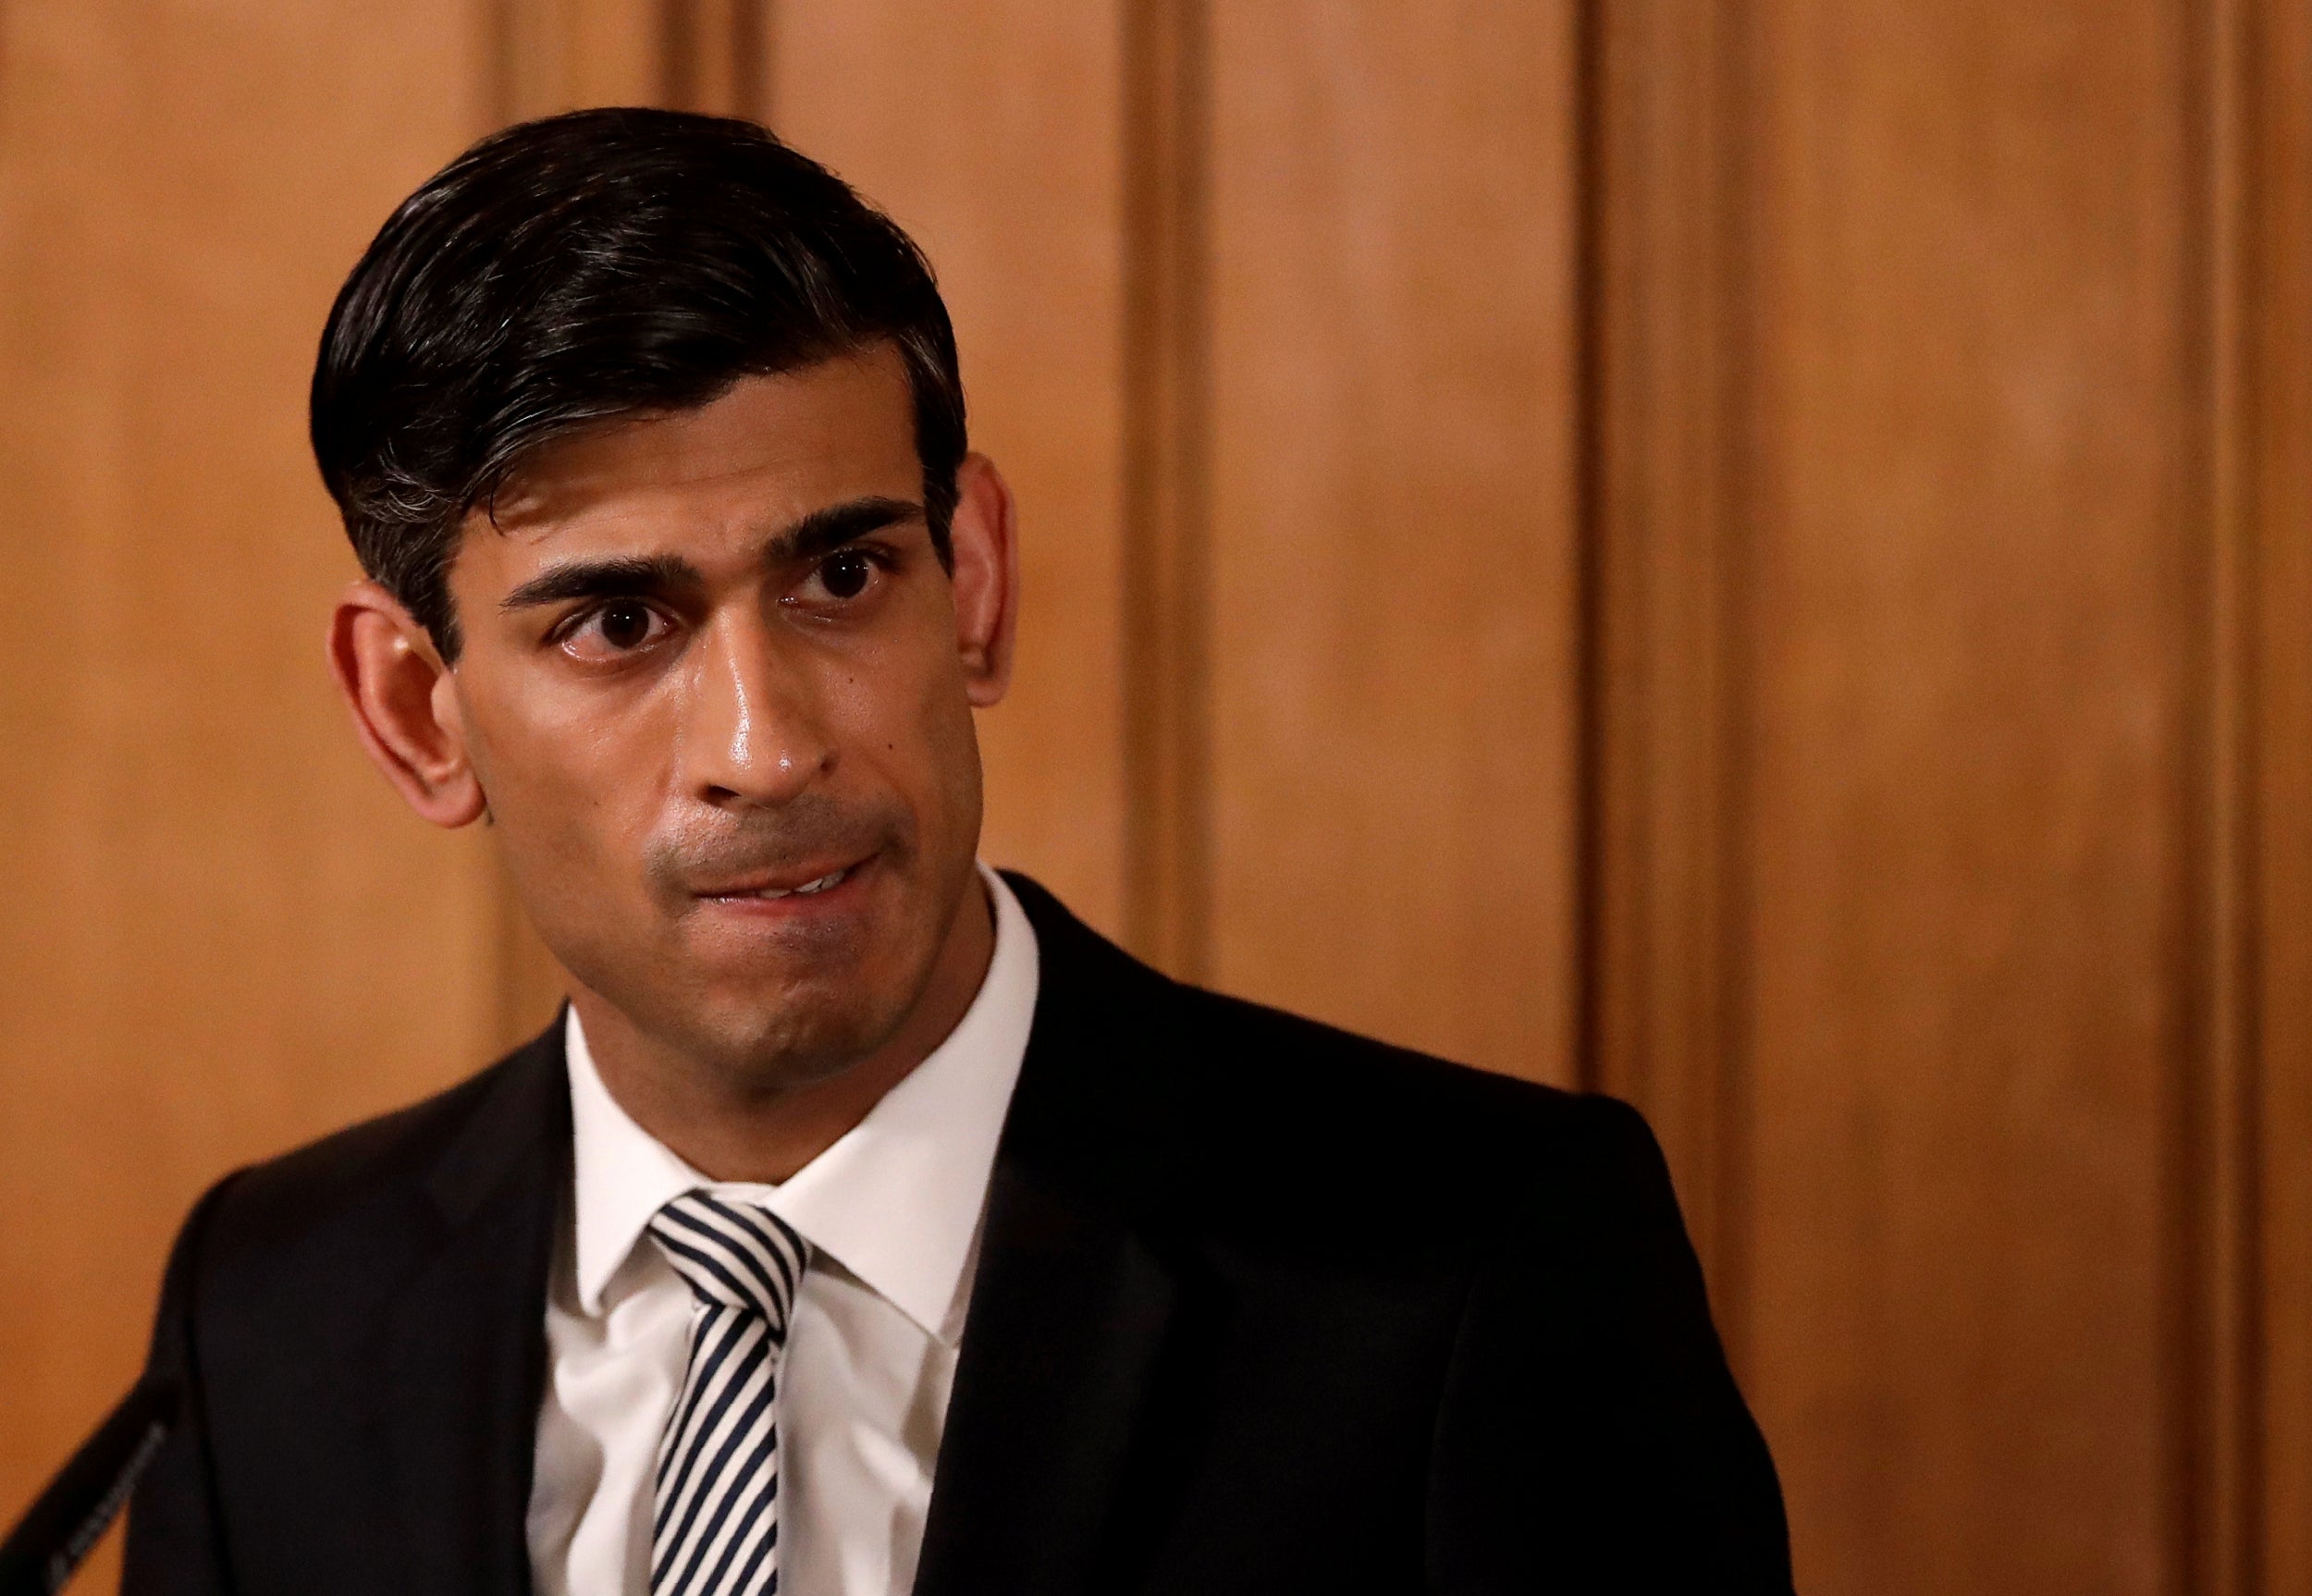 Rishi Sunak was quick in responding to the pandemic by borrowing vast sums to keep people in jobs and businesses afloat